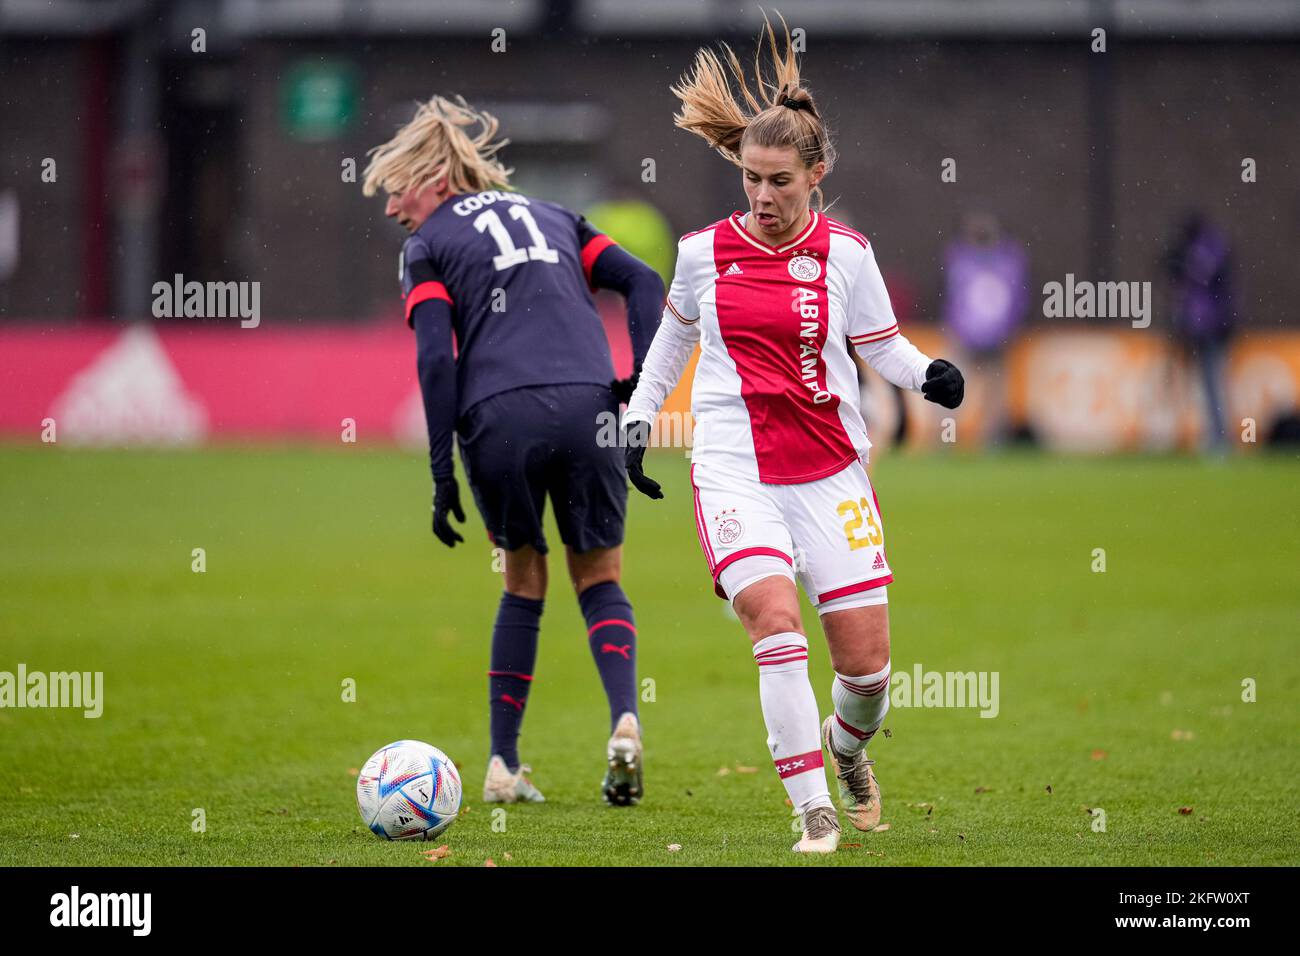 Soccerdonna on X: .@AjaxVrouwen win their 5️⃣th KNVB Beker Cup by beating  @PSV_Vrouwen with 2:1. ⚪️🔴 Ajax's men's team lost to PSV men's in  yesterday's cup final, so it's a successful revenge.